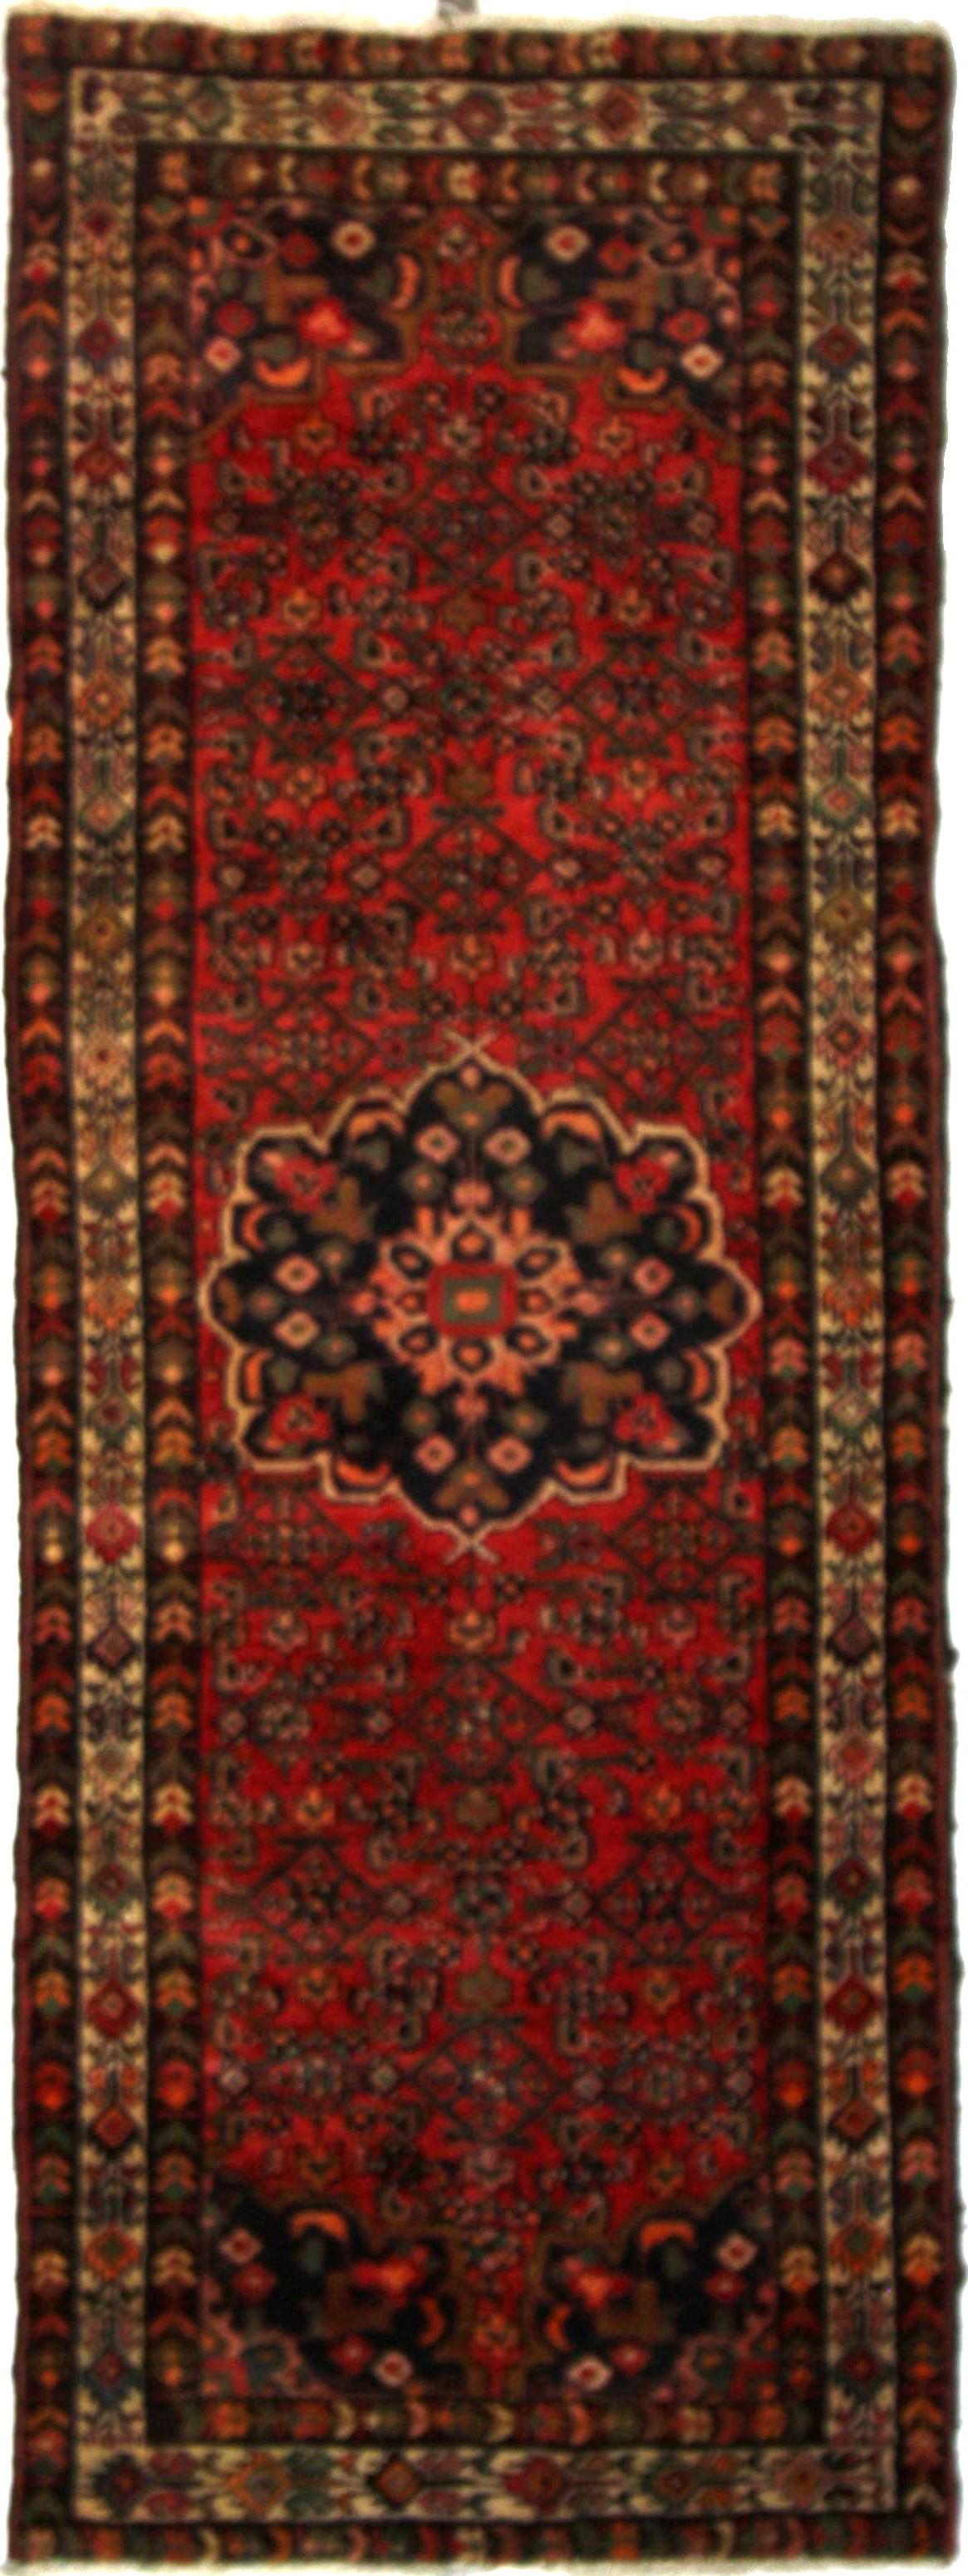 Hand Knotted Wool Red Traditional Persian Rug 3'6" x 9'8"